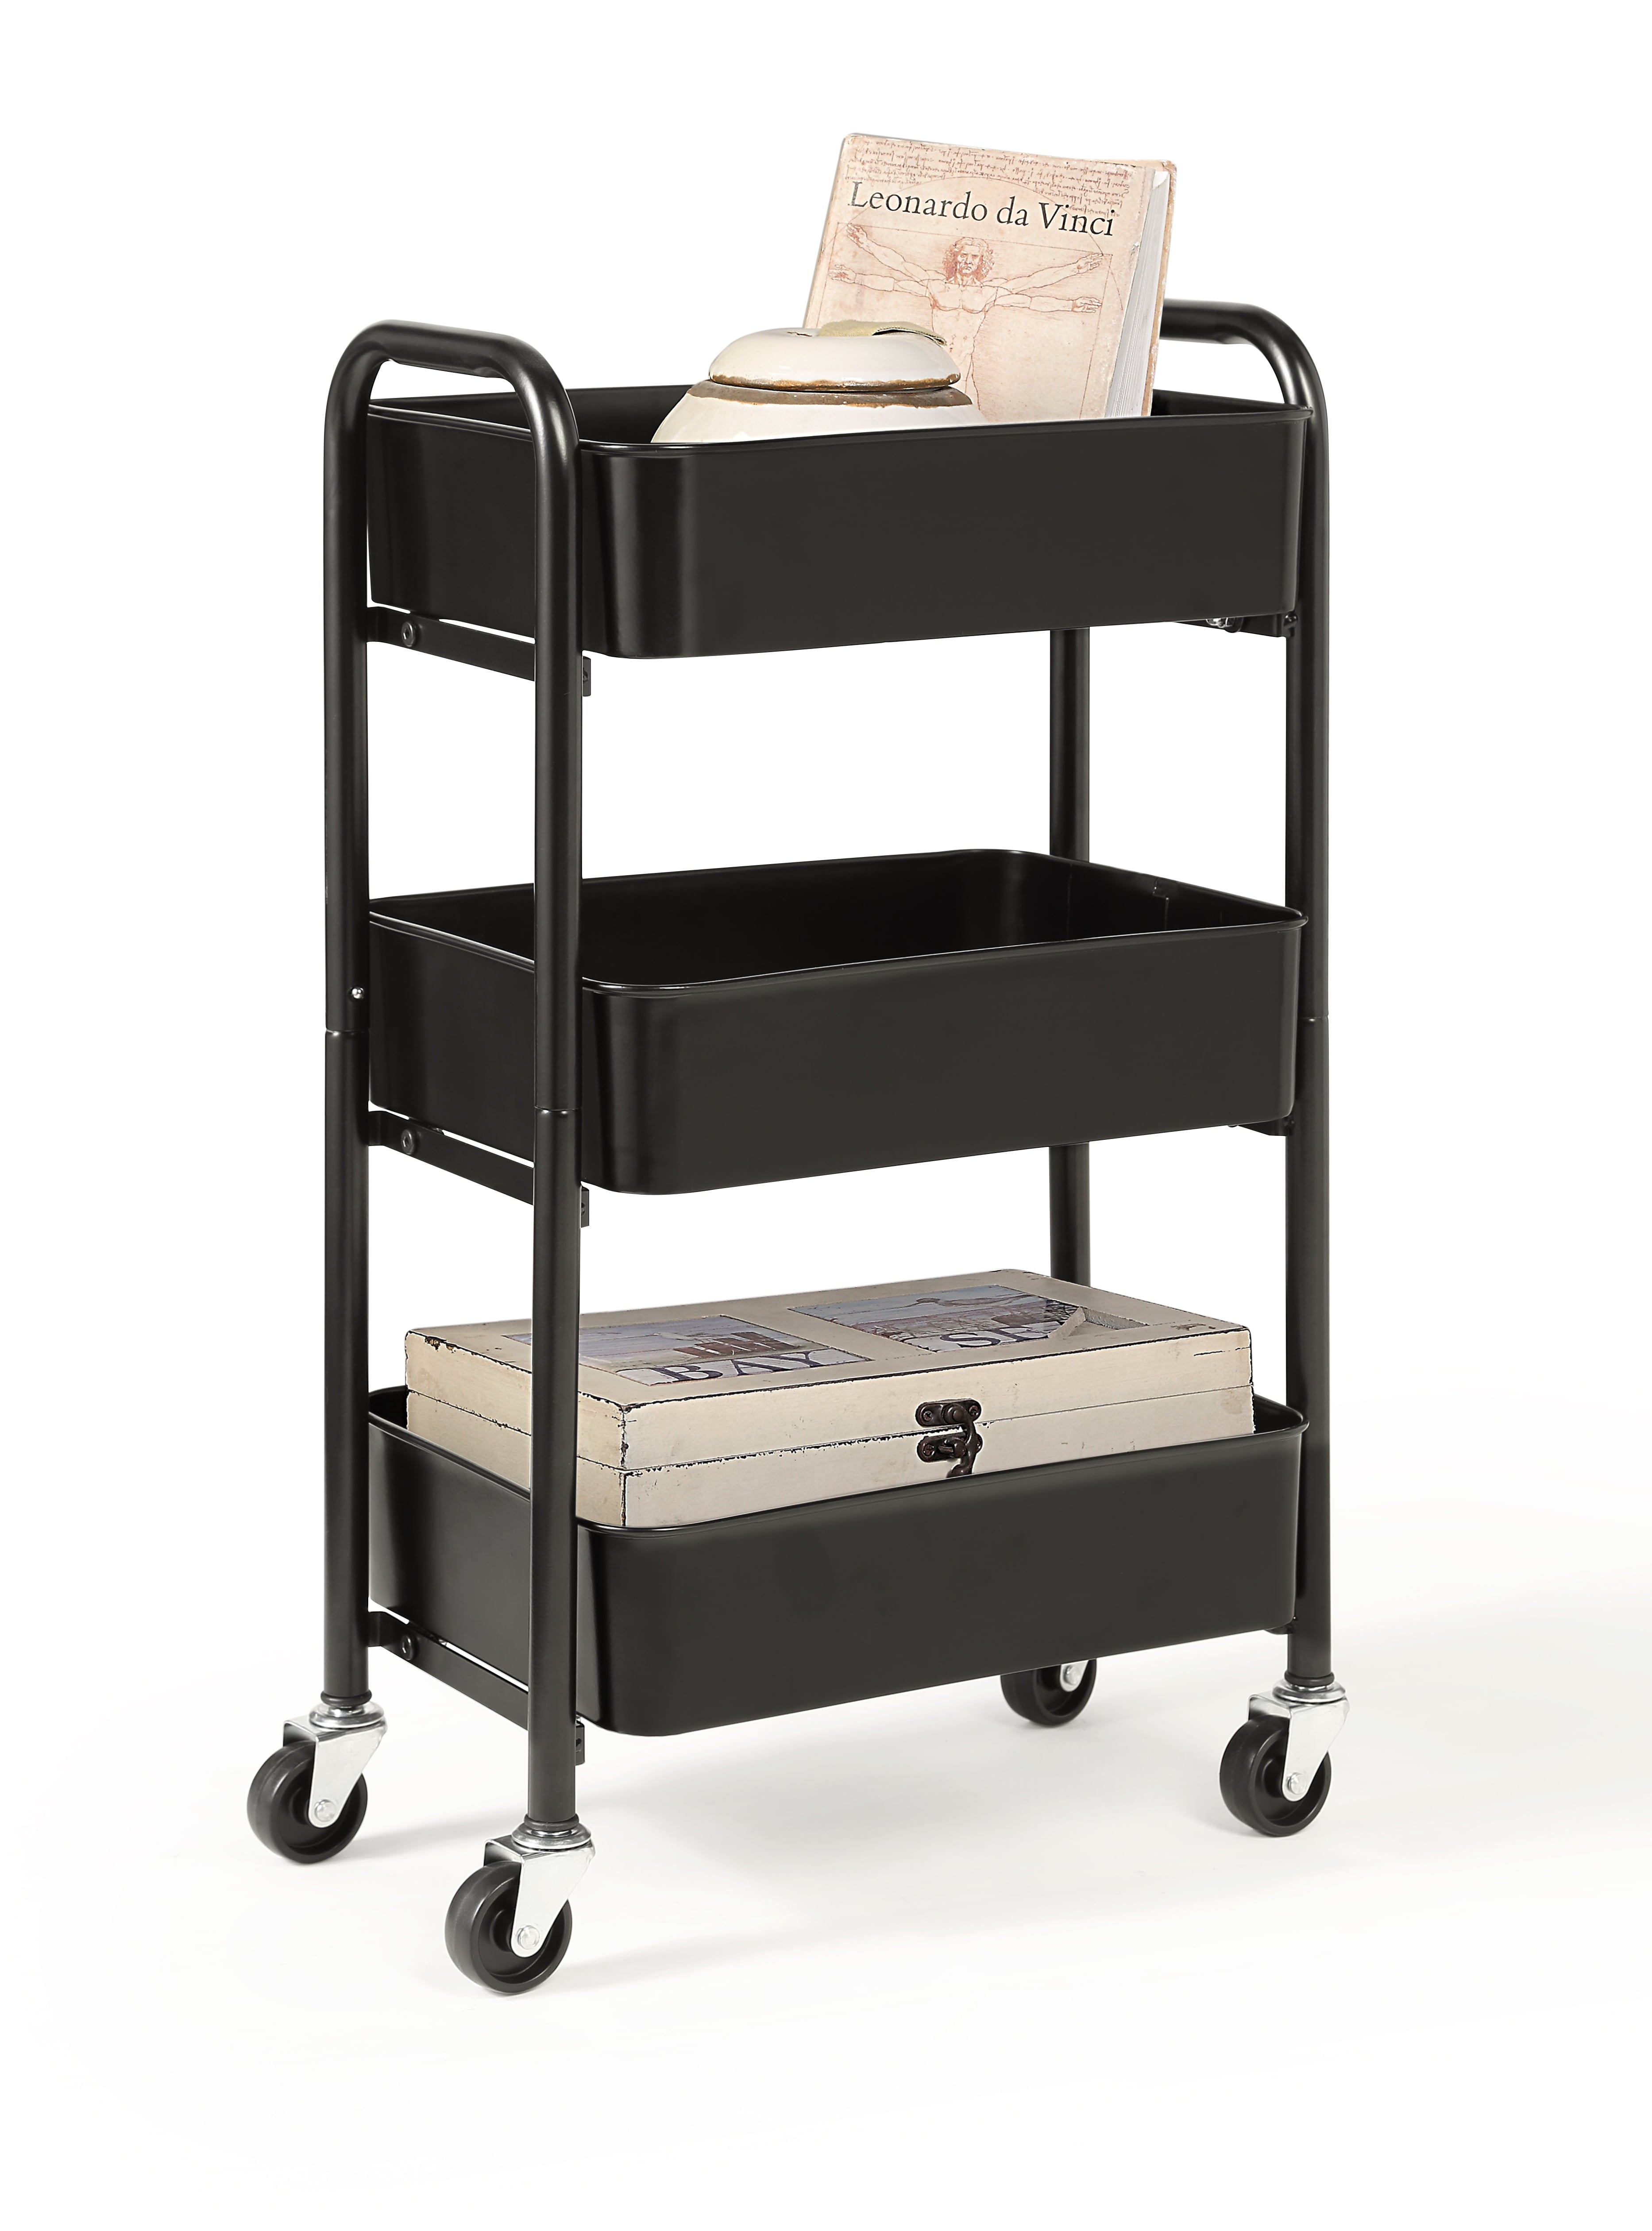 SunnyPoint 3-Tier Compact Rolling Metal Utility Cart Kitchen with Caster Wheels， Black